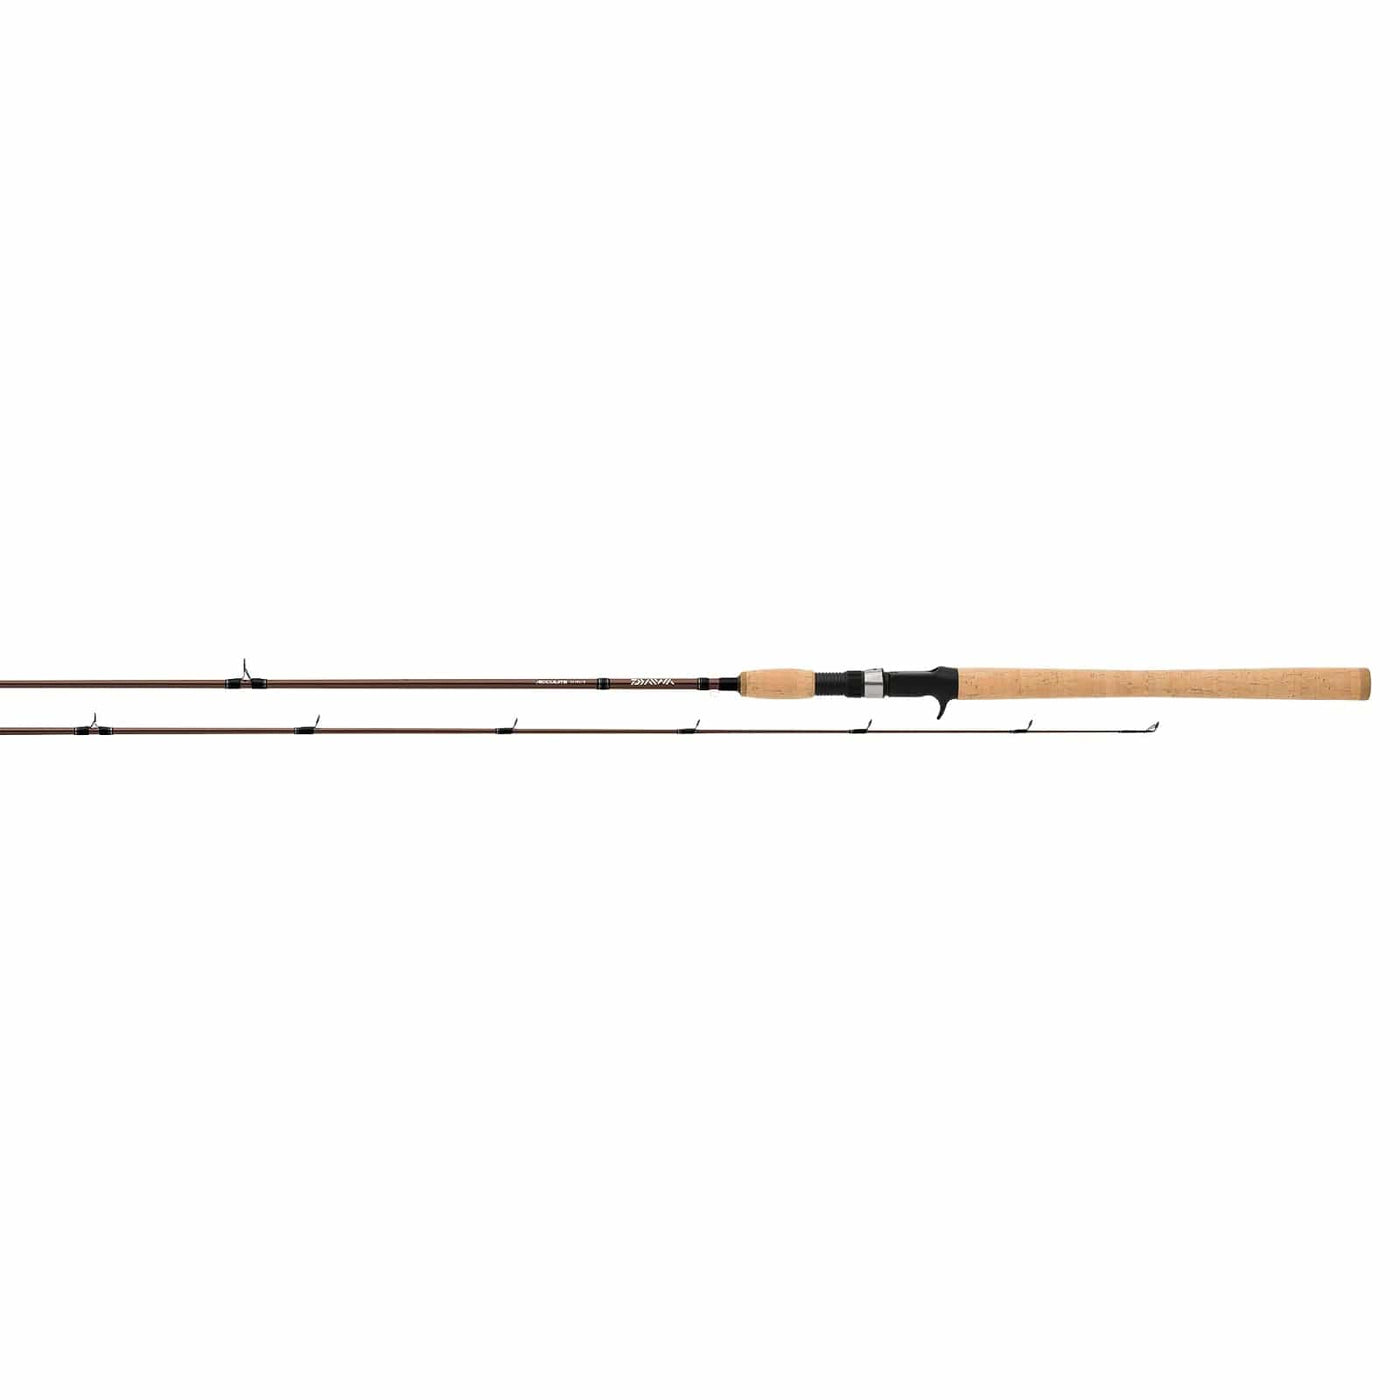 Daiwa Daiwa Acculite Spinning Rod ACLT1062LSS 10 ft 6 in 2 pc Fishing